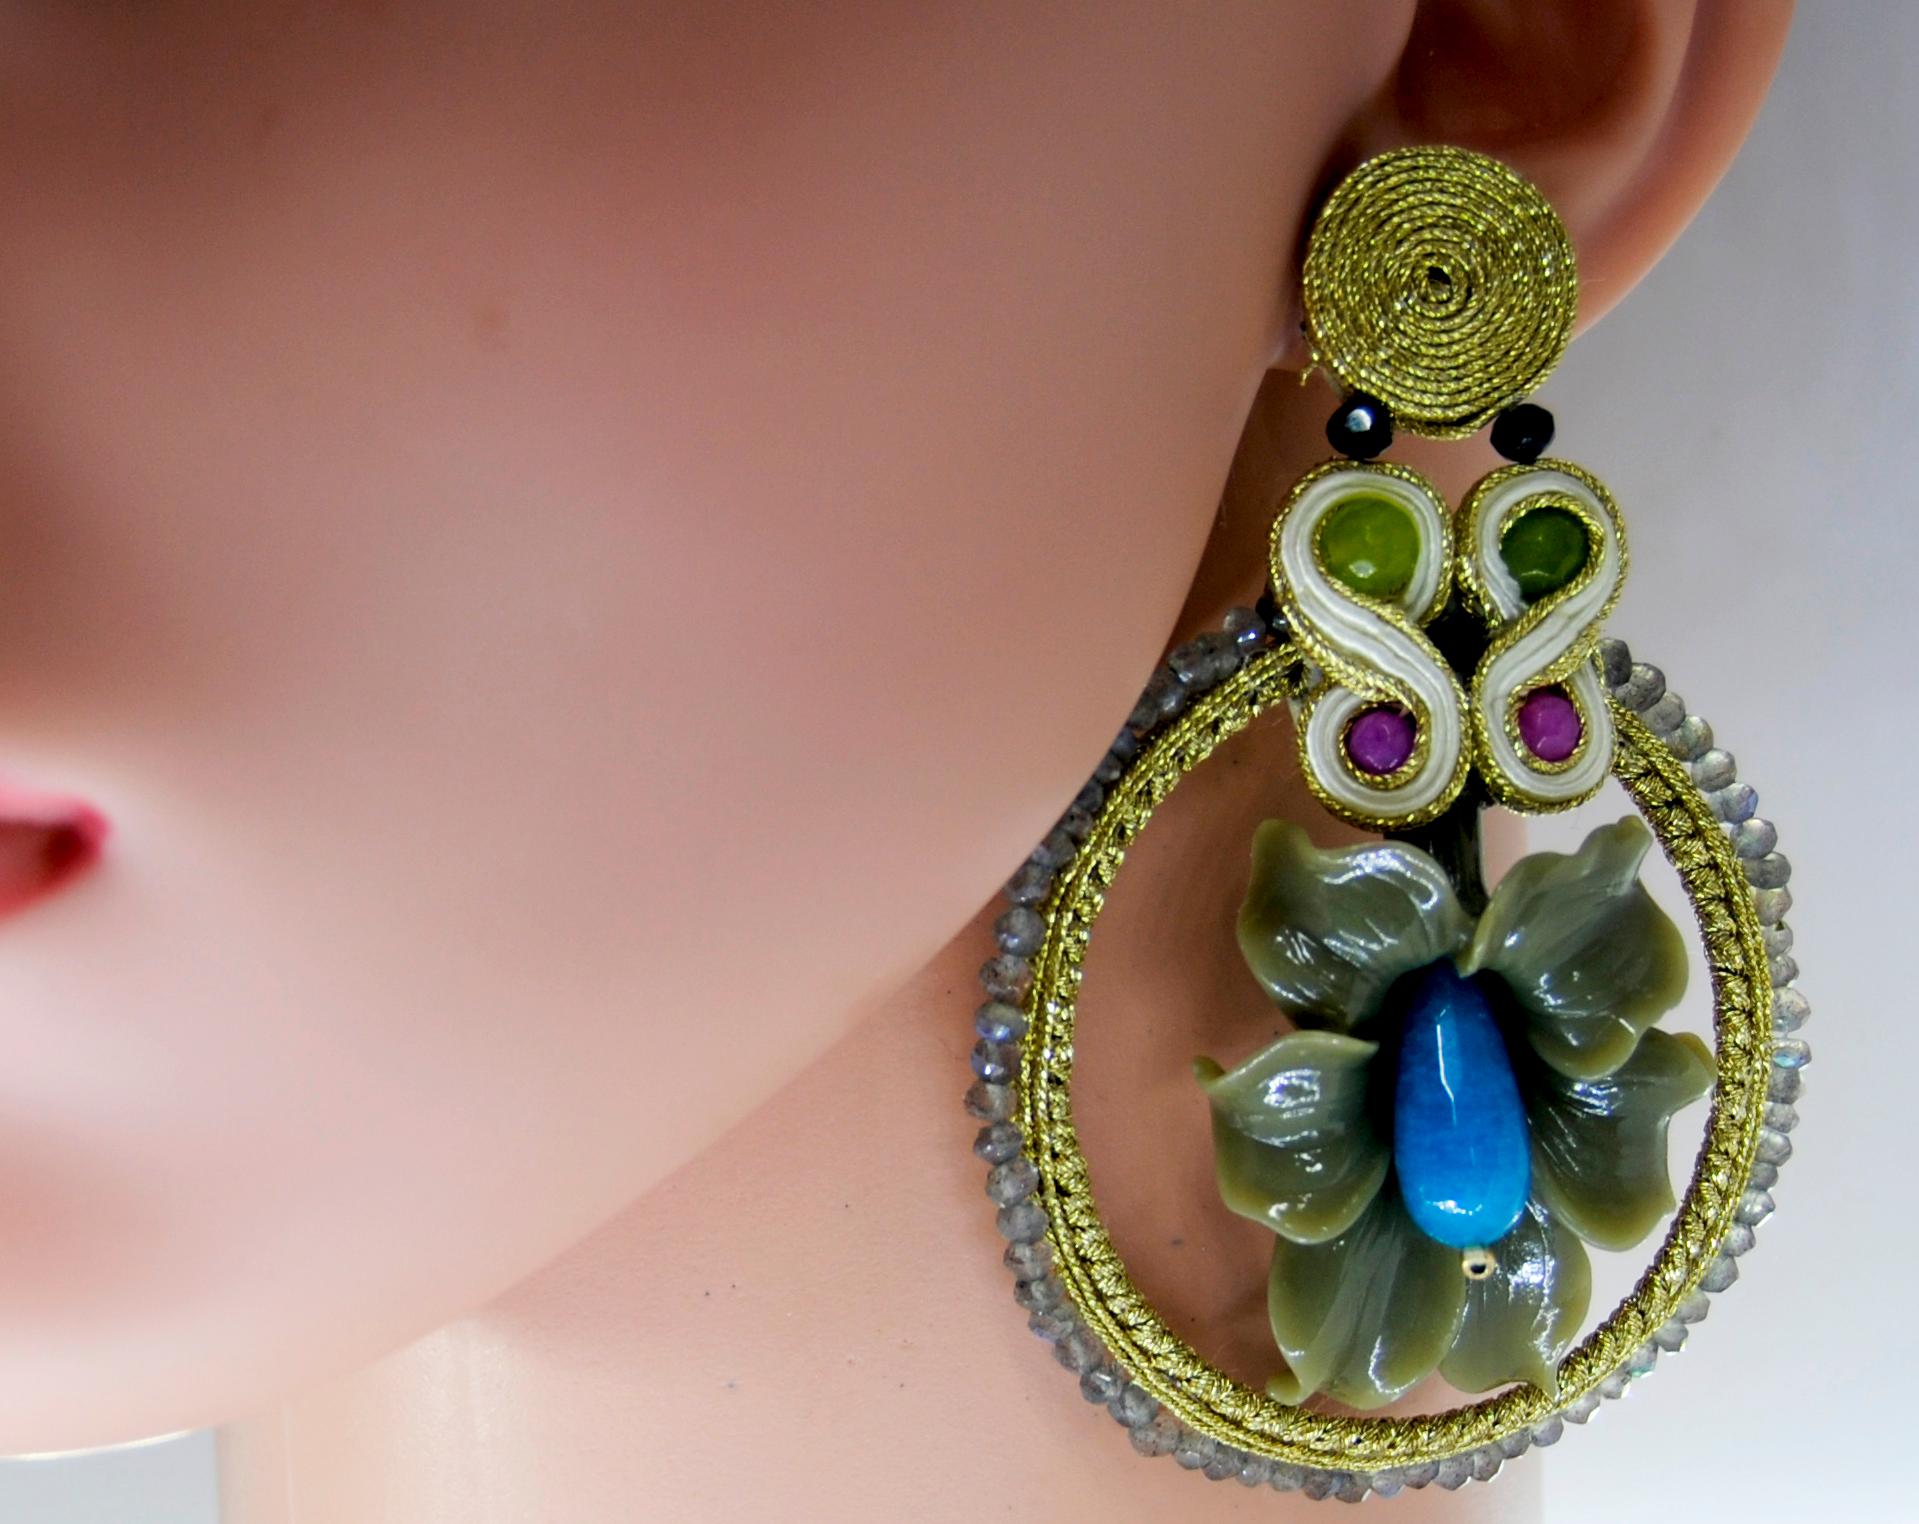 Women's Pradera Kalas Travel Jewelry Collection Silver and Soutache with Resins and Jade